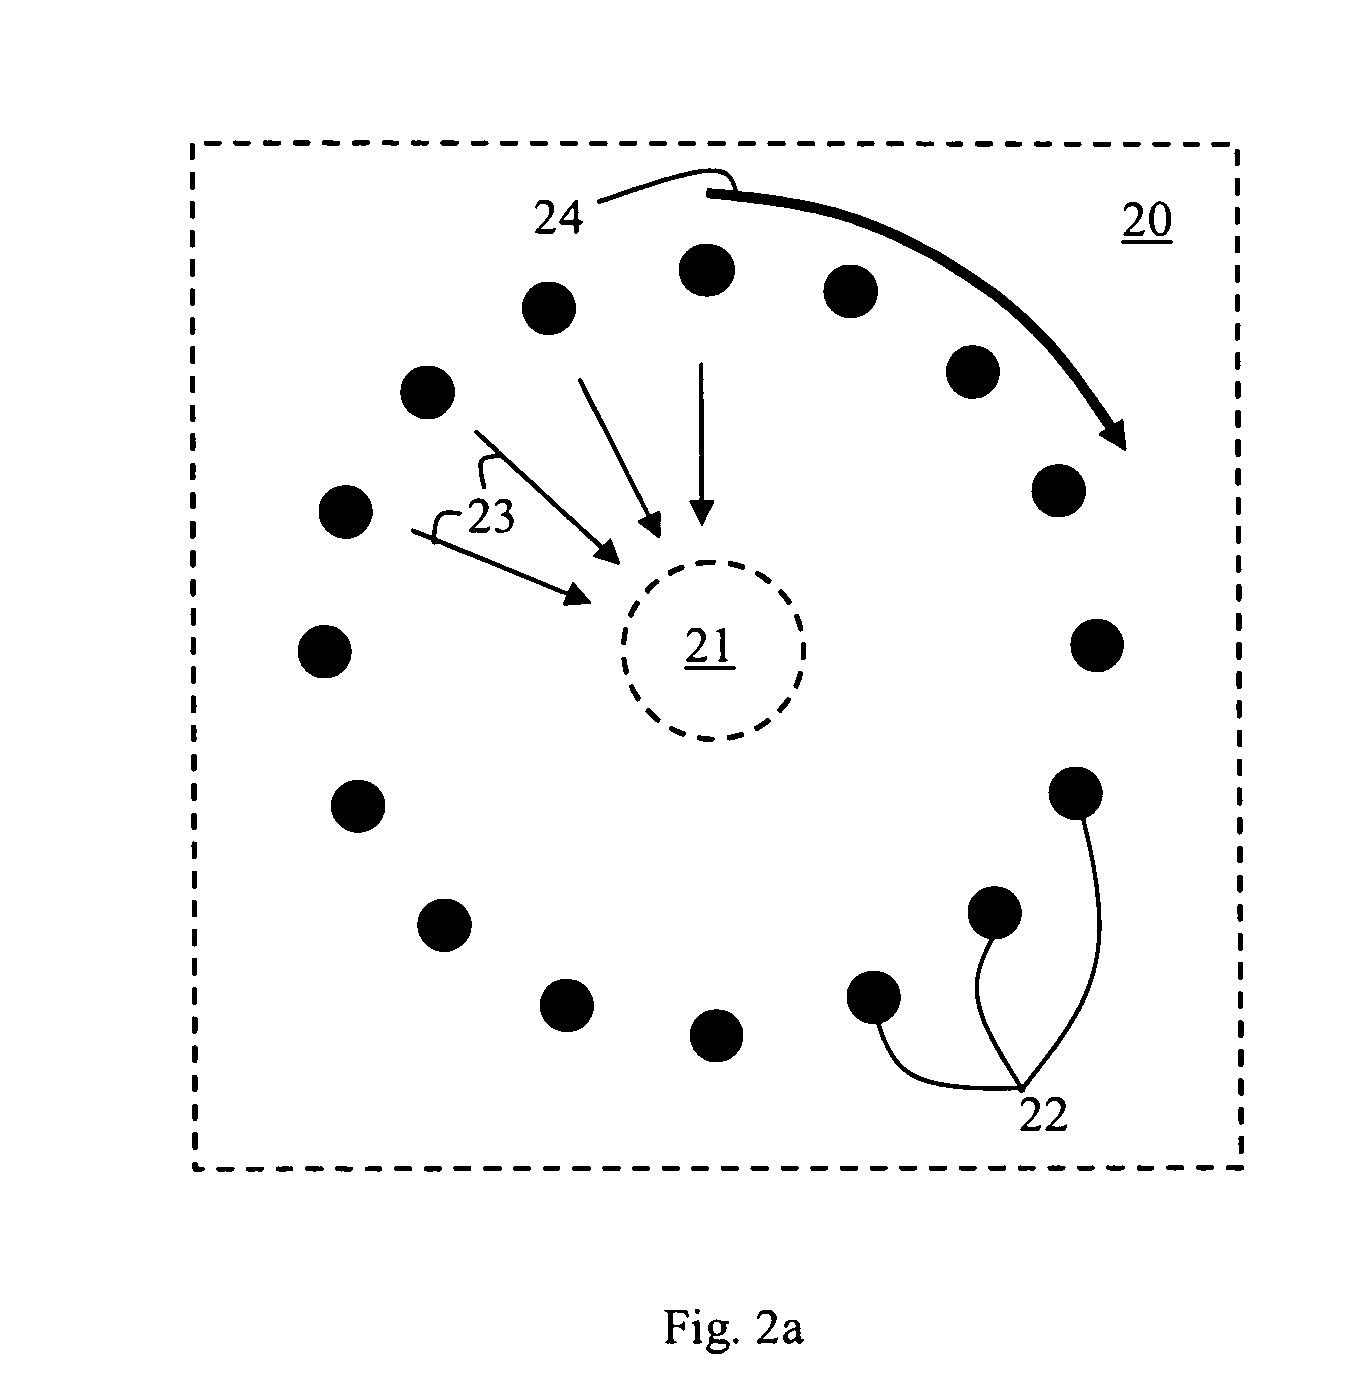 Selective control of wireless initiation devices at a blast site